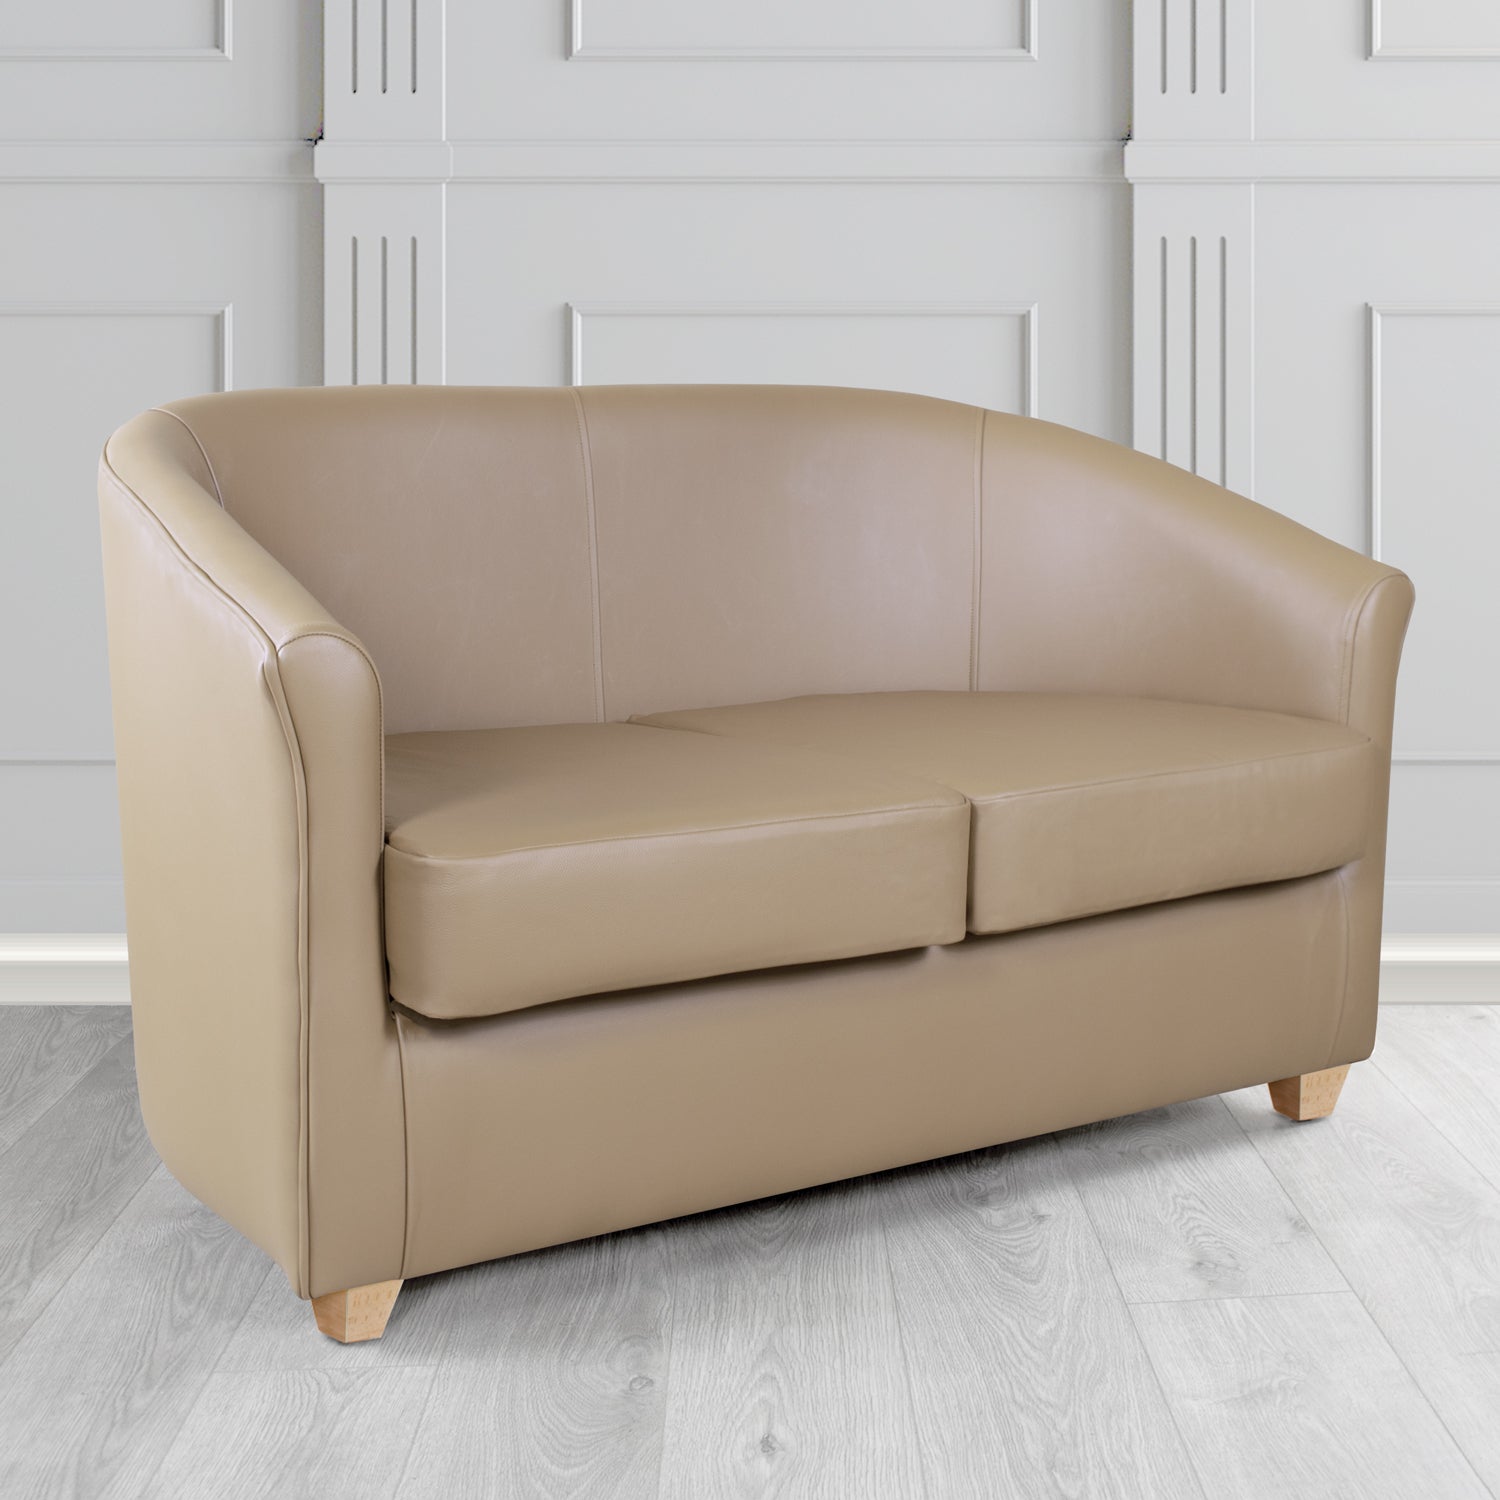 Cannes 2 Seater Tub Sofa in Just Colour Magnum Crib 5 Faux Leather - The Tub Chair Shop